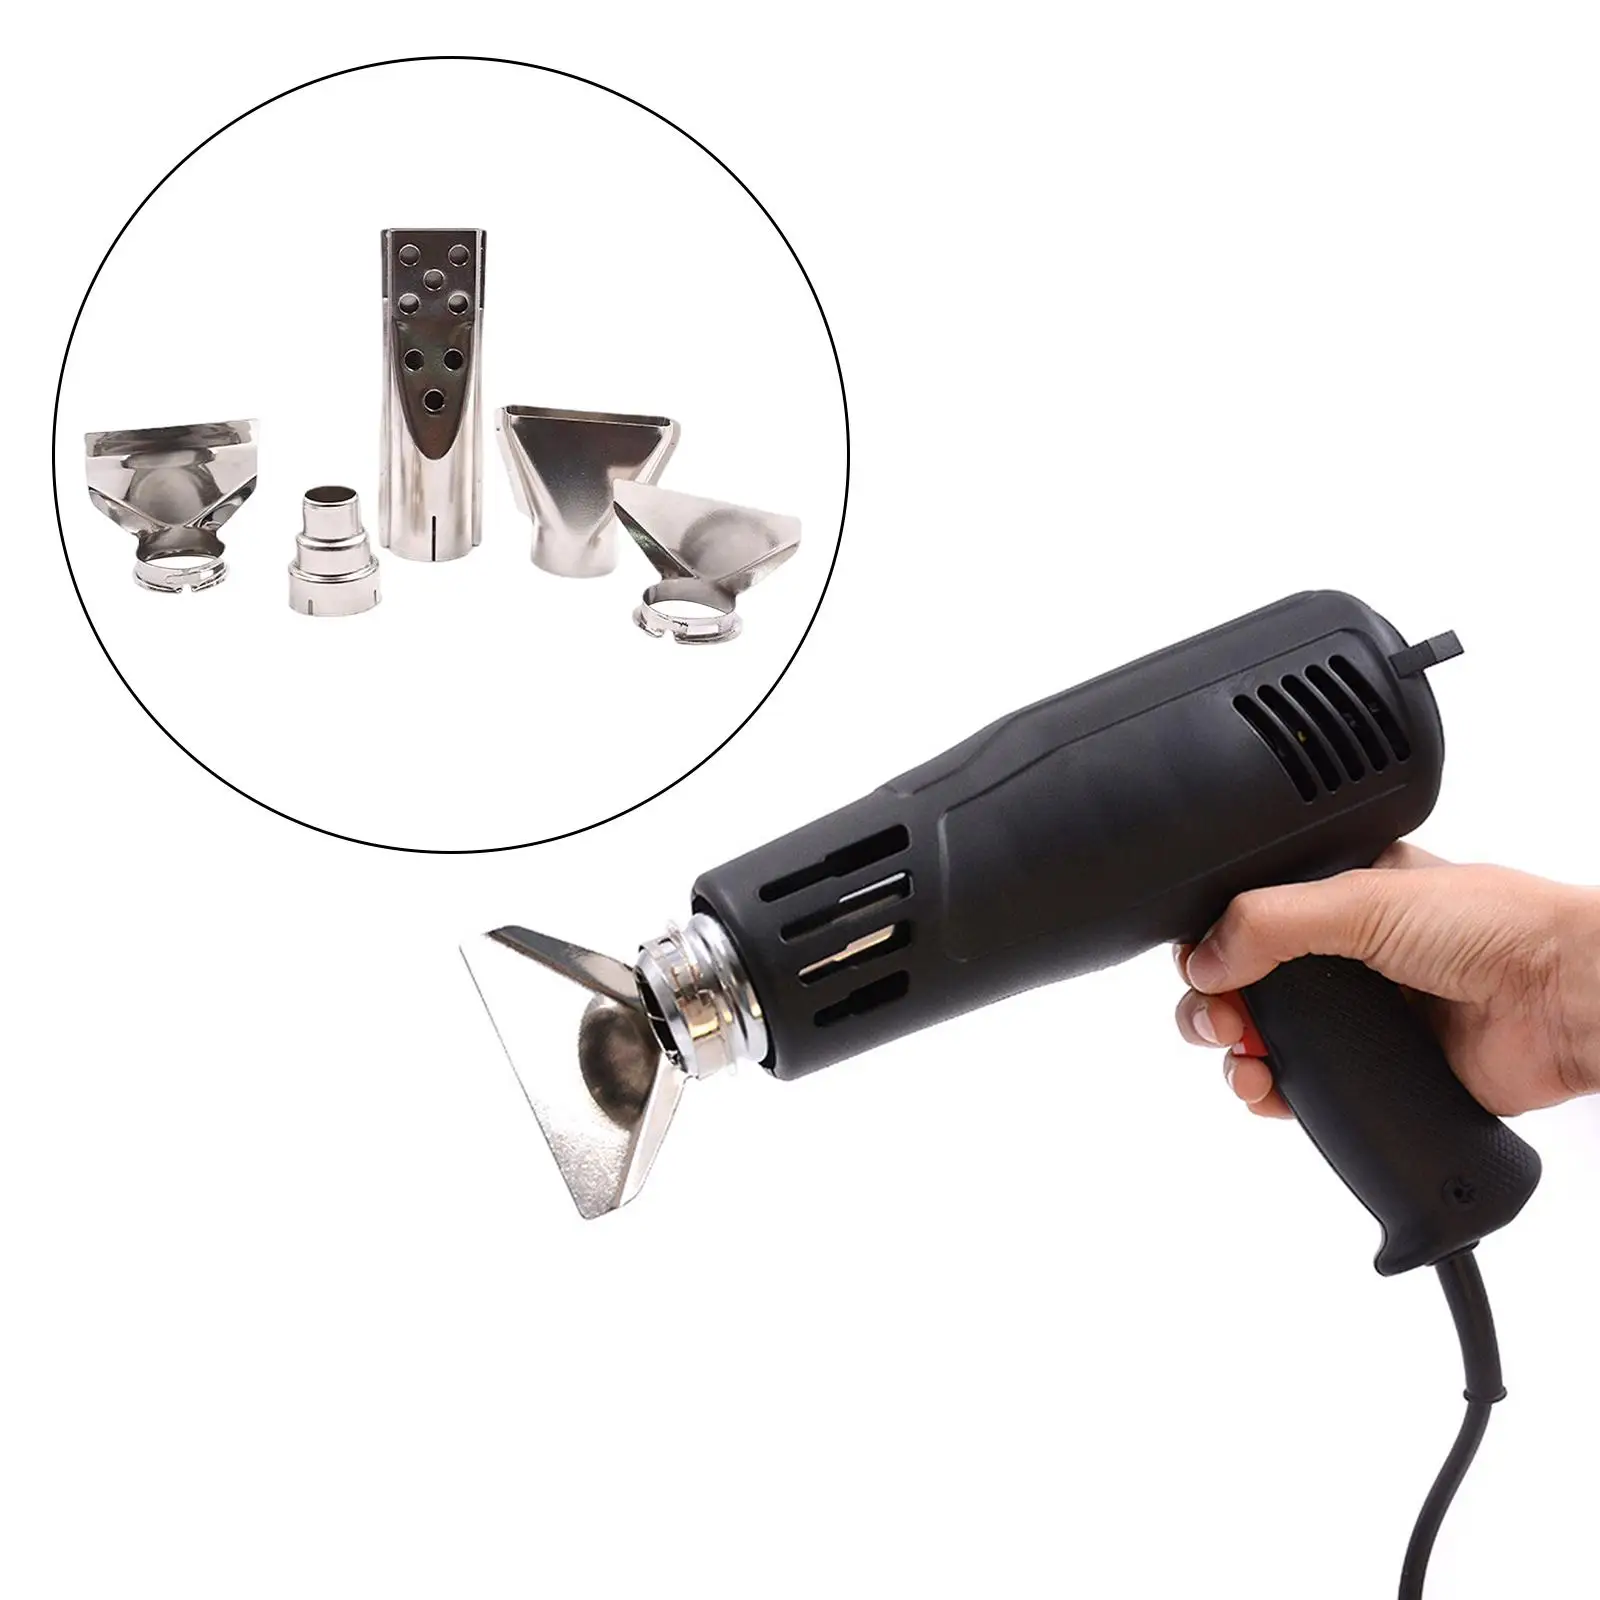 5x Practical Heat Nozzle Attachments Steel Nozzles Repair Tools Hot Air Blower Accessories for Crafting Shrinking Heat Welding